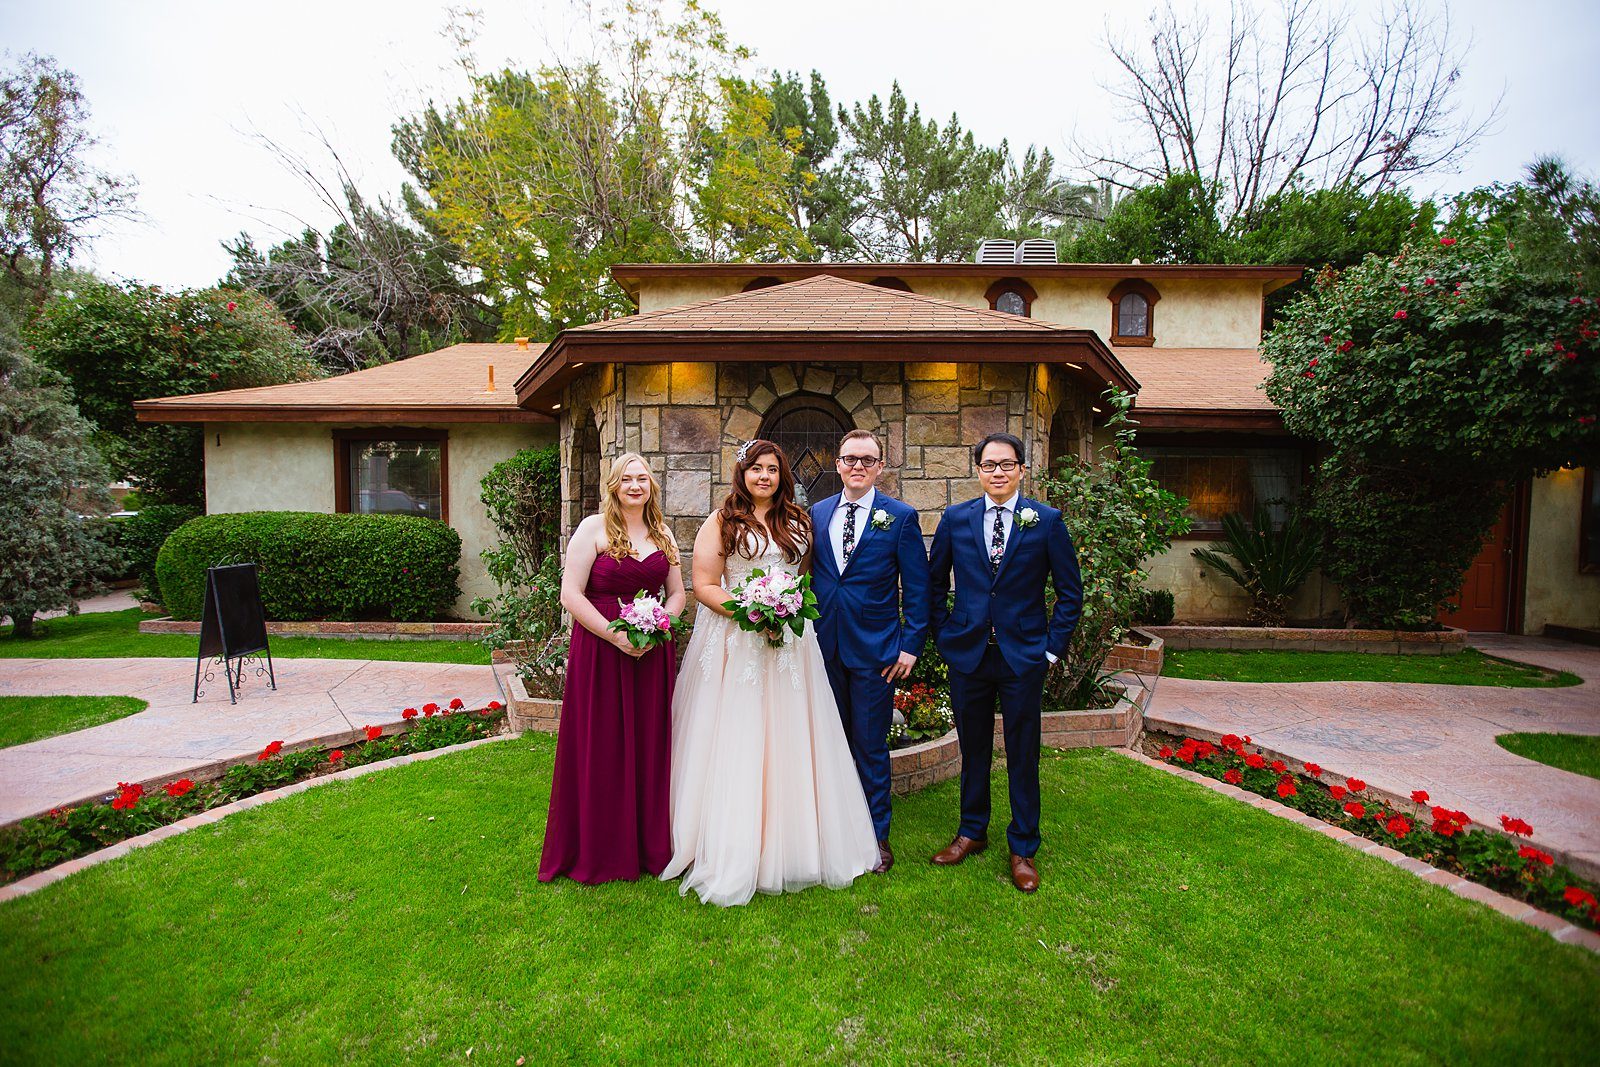 Bridal party together at a The Wright House Provencal wedding by Arizona wedding photographer PMA Photography.